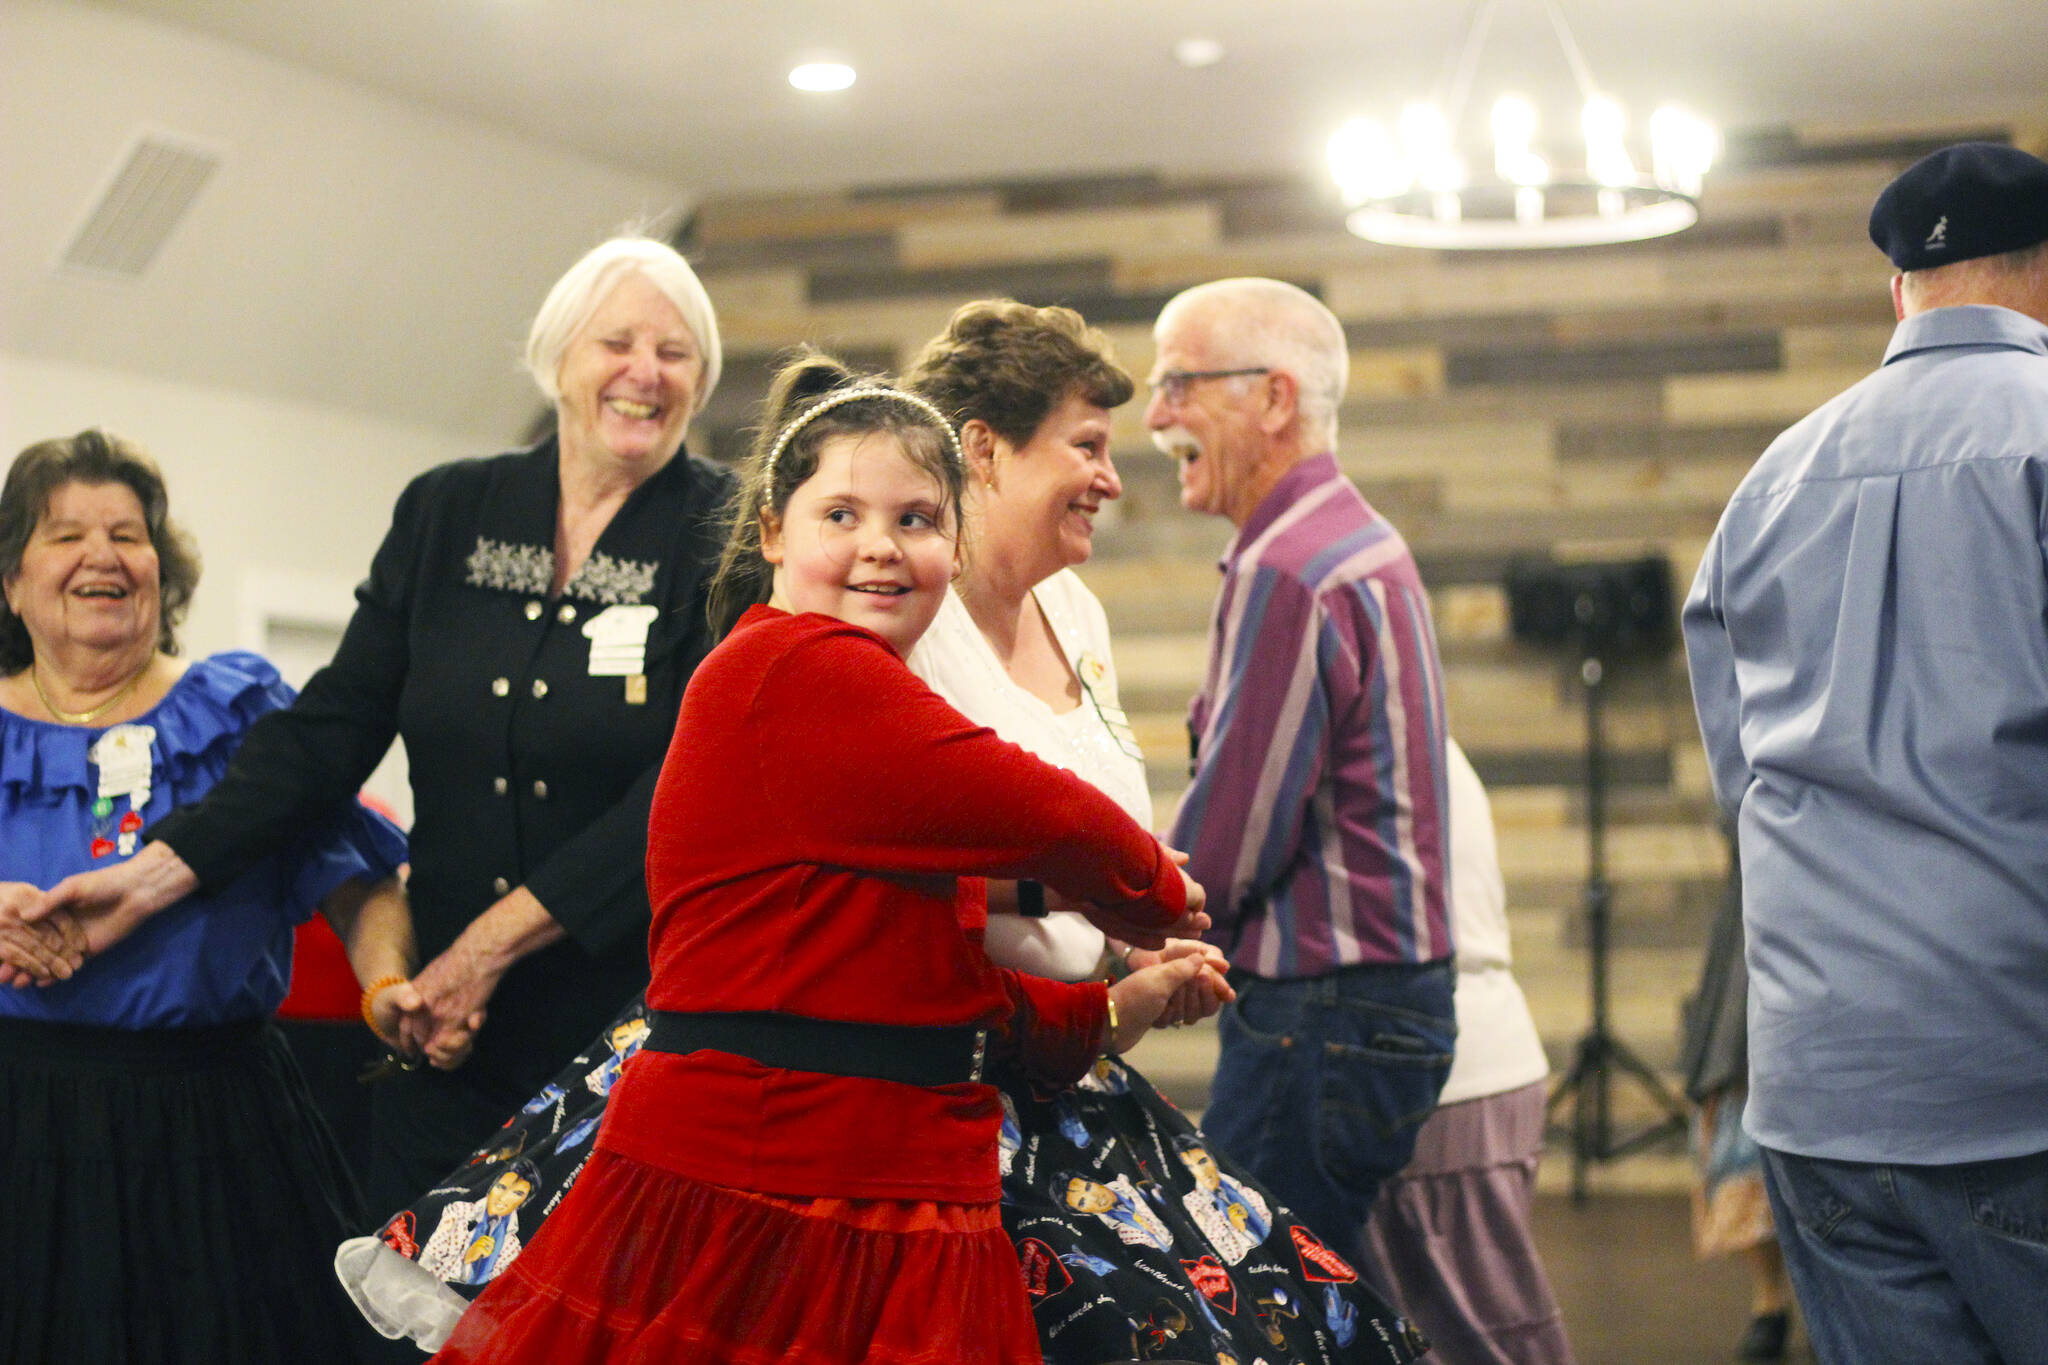 The Spinners meet every Friday night for an open dance. Many of the dances are square dances, but the club also has a few round dances as well. Pictured is Taylor Wild, the youngest member of the group, in red. Photo by Ray Miller-Still